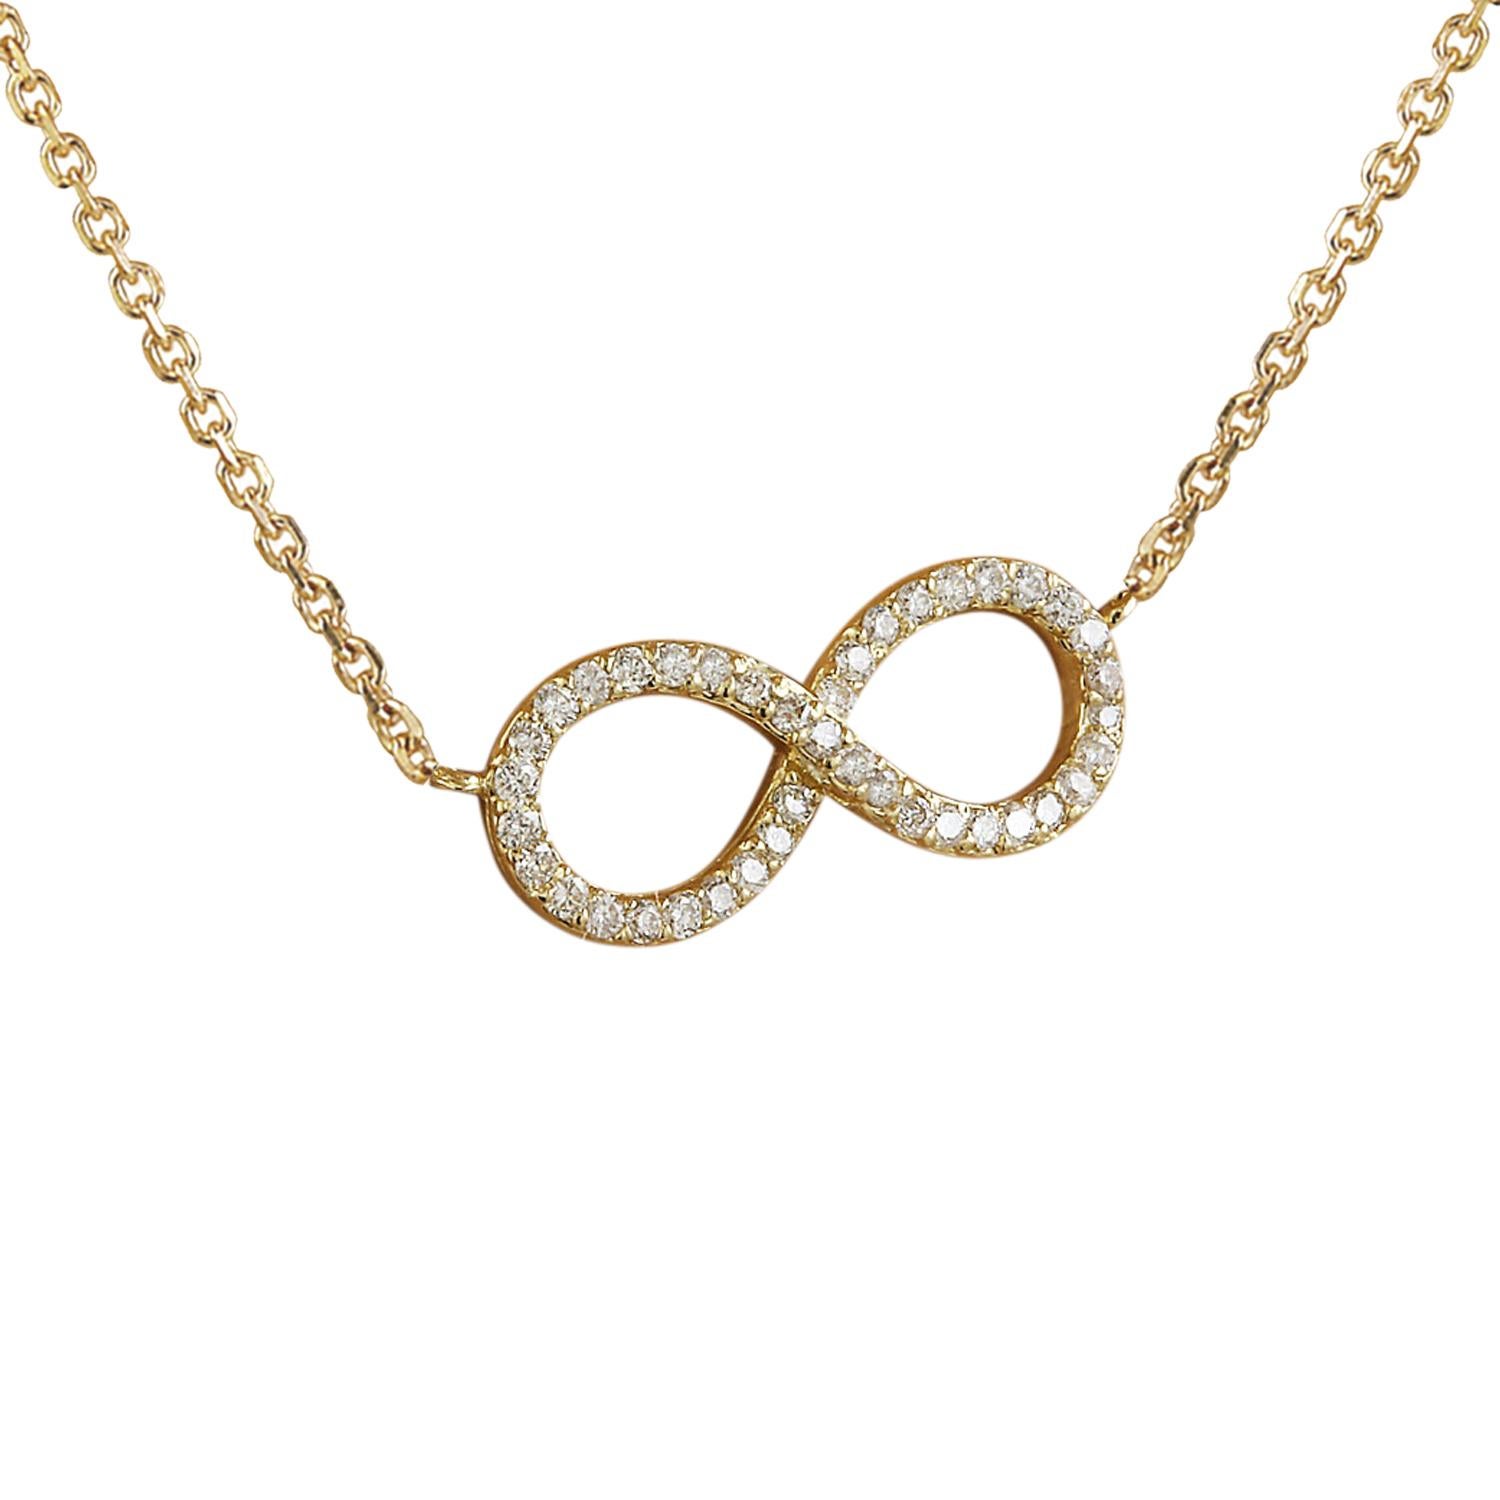 Introducing our stunning 0.30 Carat Natural Diamond Infinity Necklace in 14 Karat Yellow Gold. Stamped with 14K authenticity, this necklace weighs 2.7 grams and measures 16 inches in length. Adorning the infinity symbol are 40 natural diamonds,